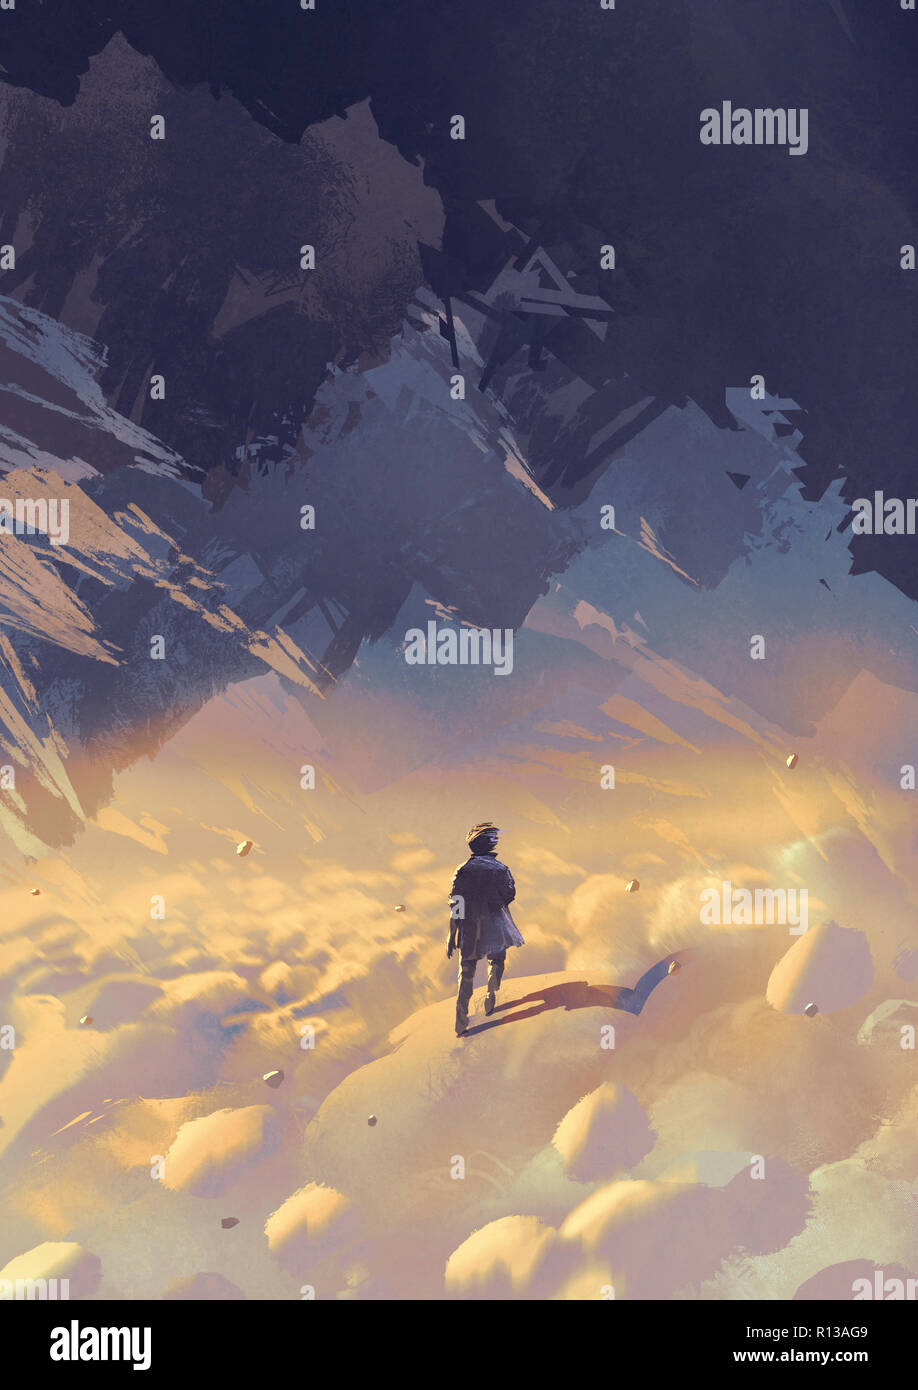 scenery of surreal world showing a man walking on clouds looking at upside-down mountains, digital art style, illustration painting Stock Photo